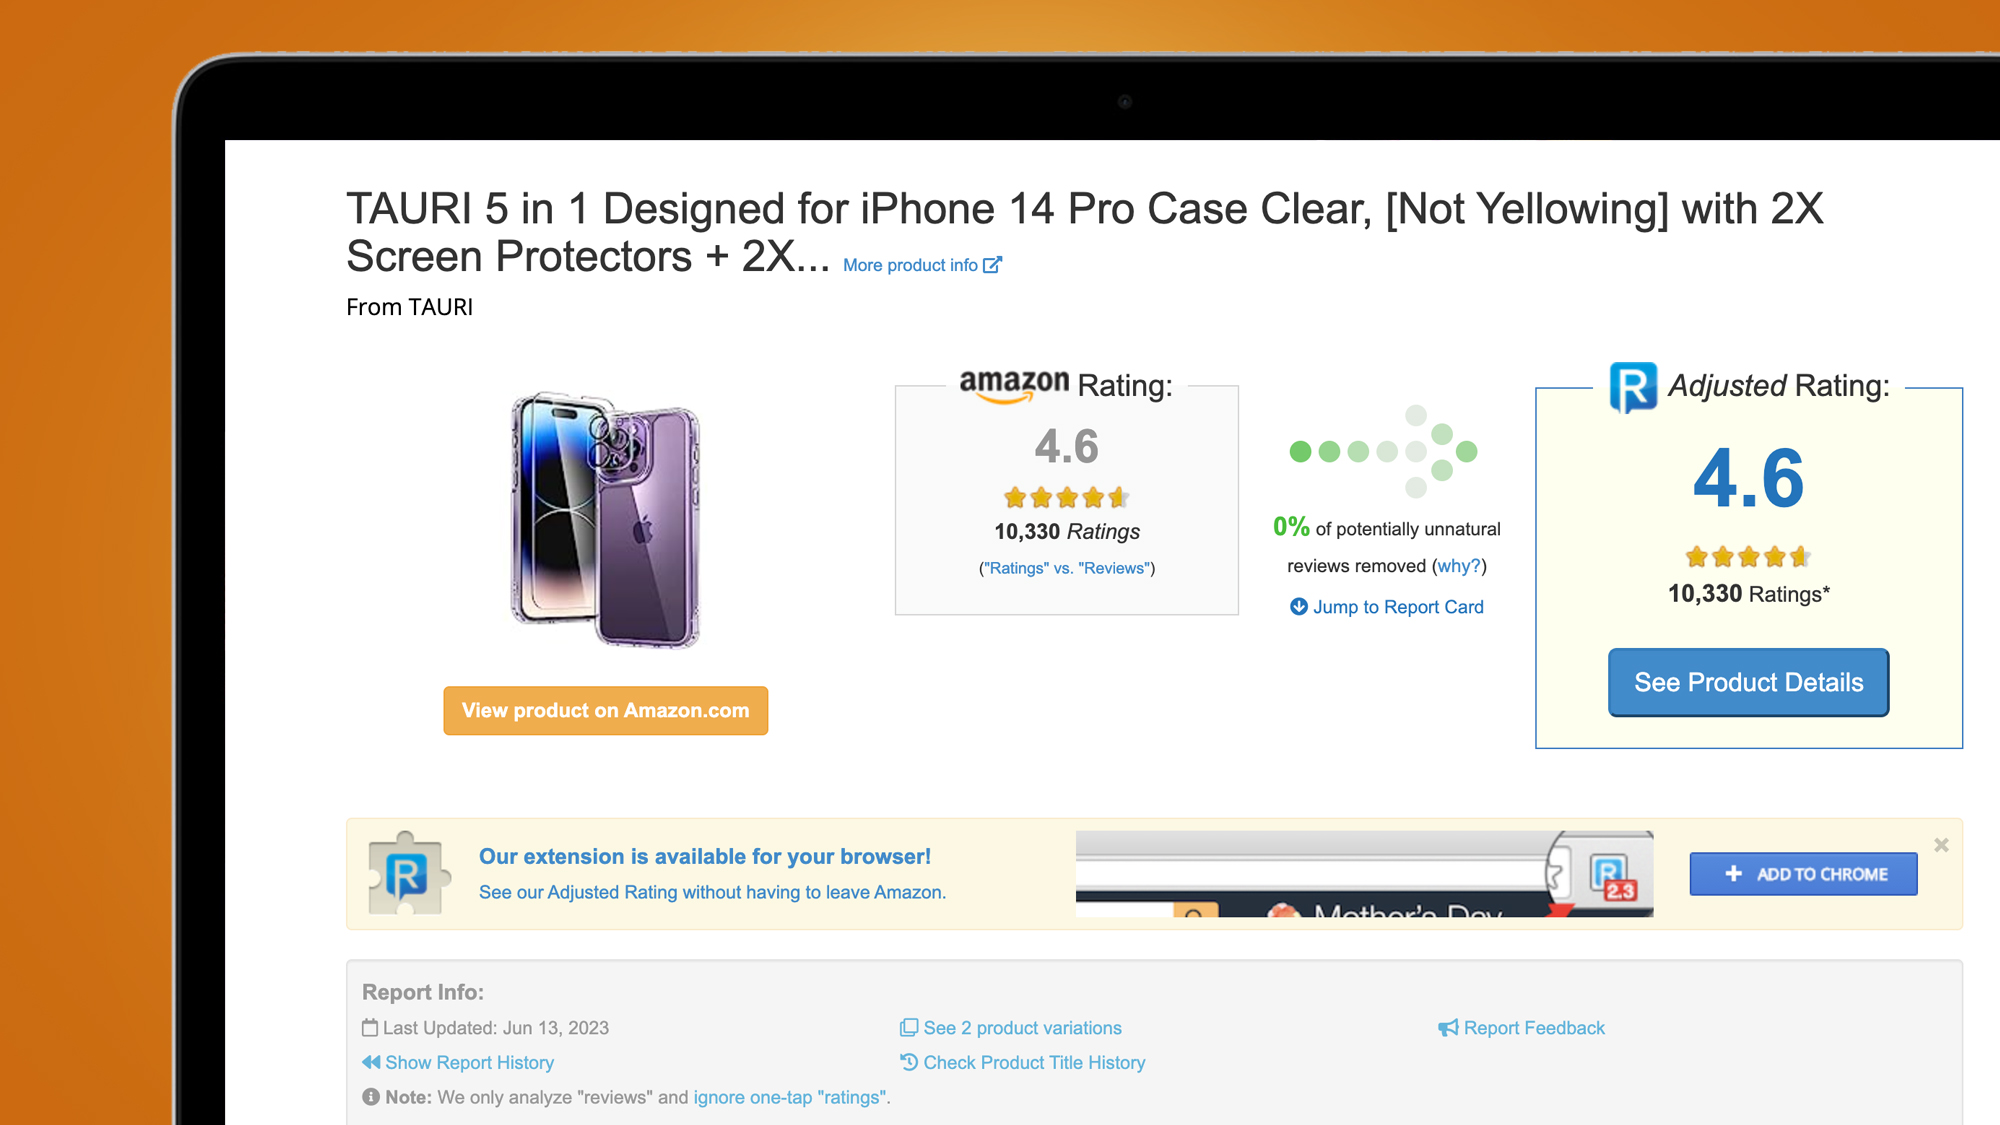 A laptop screen on an orange background showing an Amazon review in the website ReviewMeta